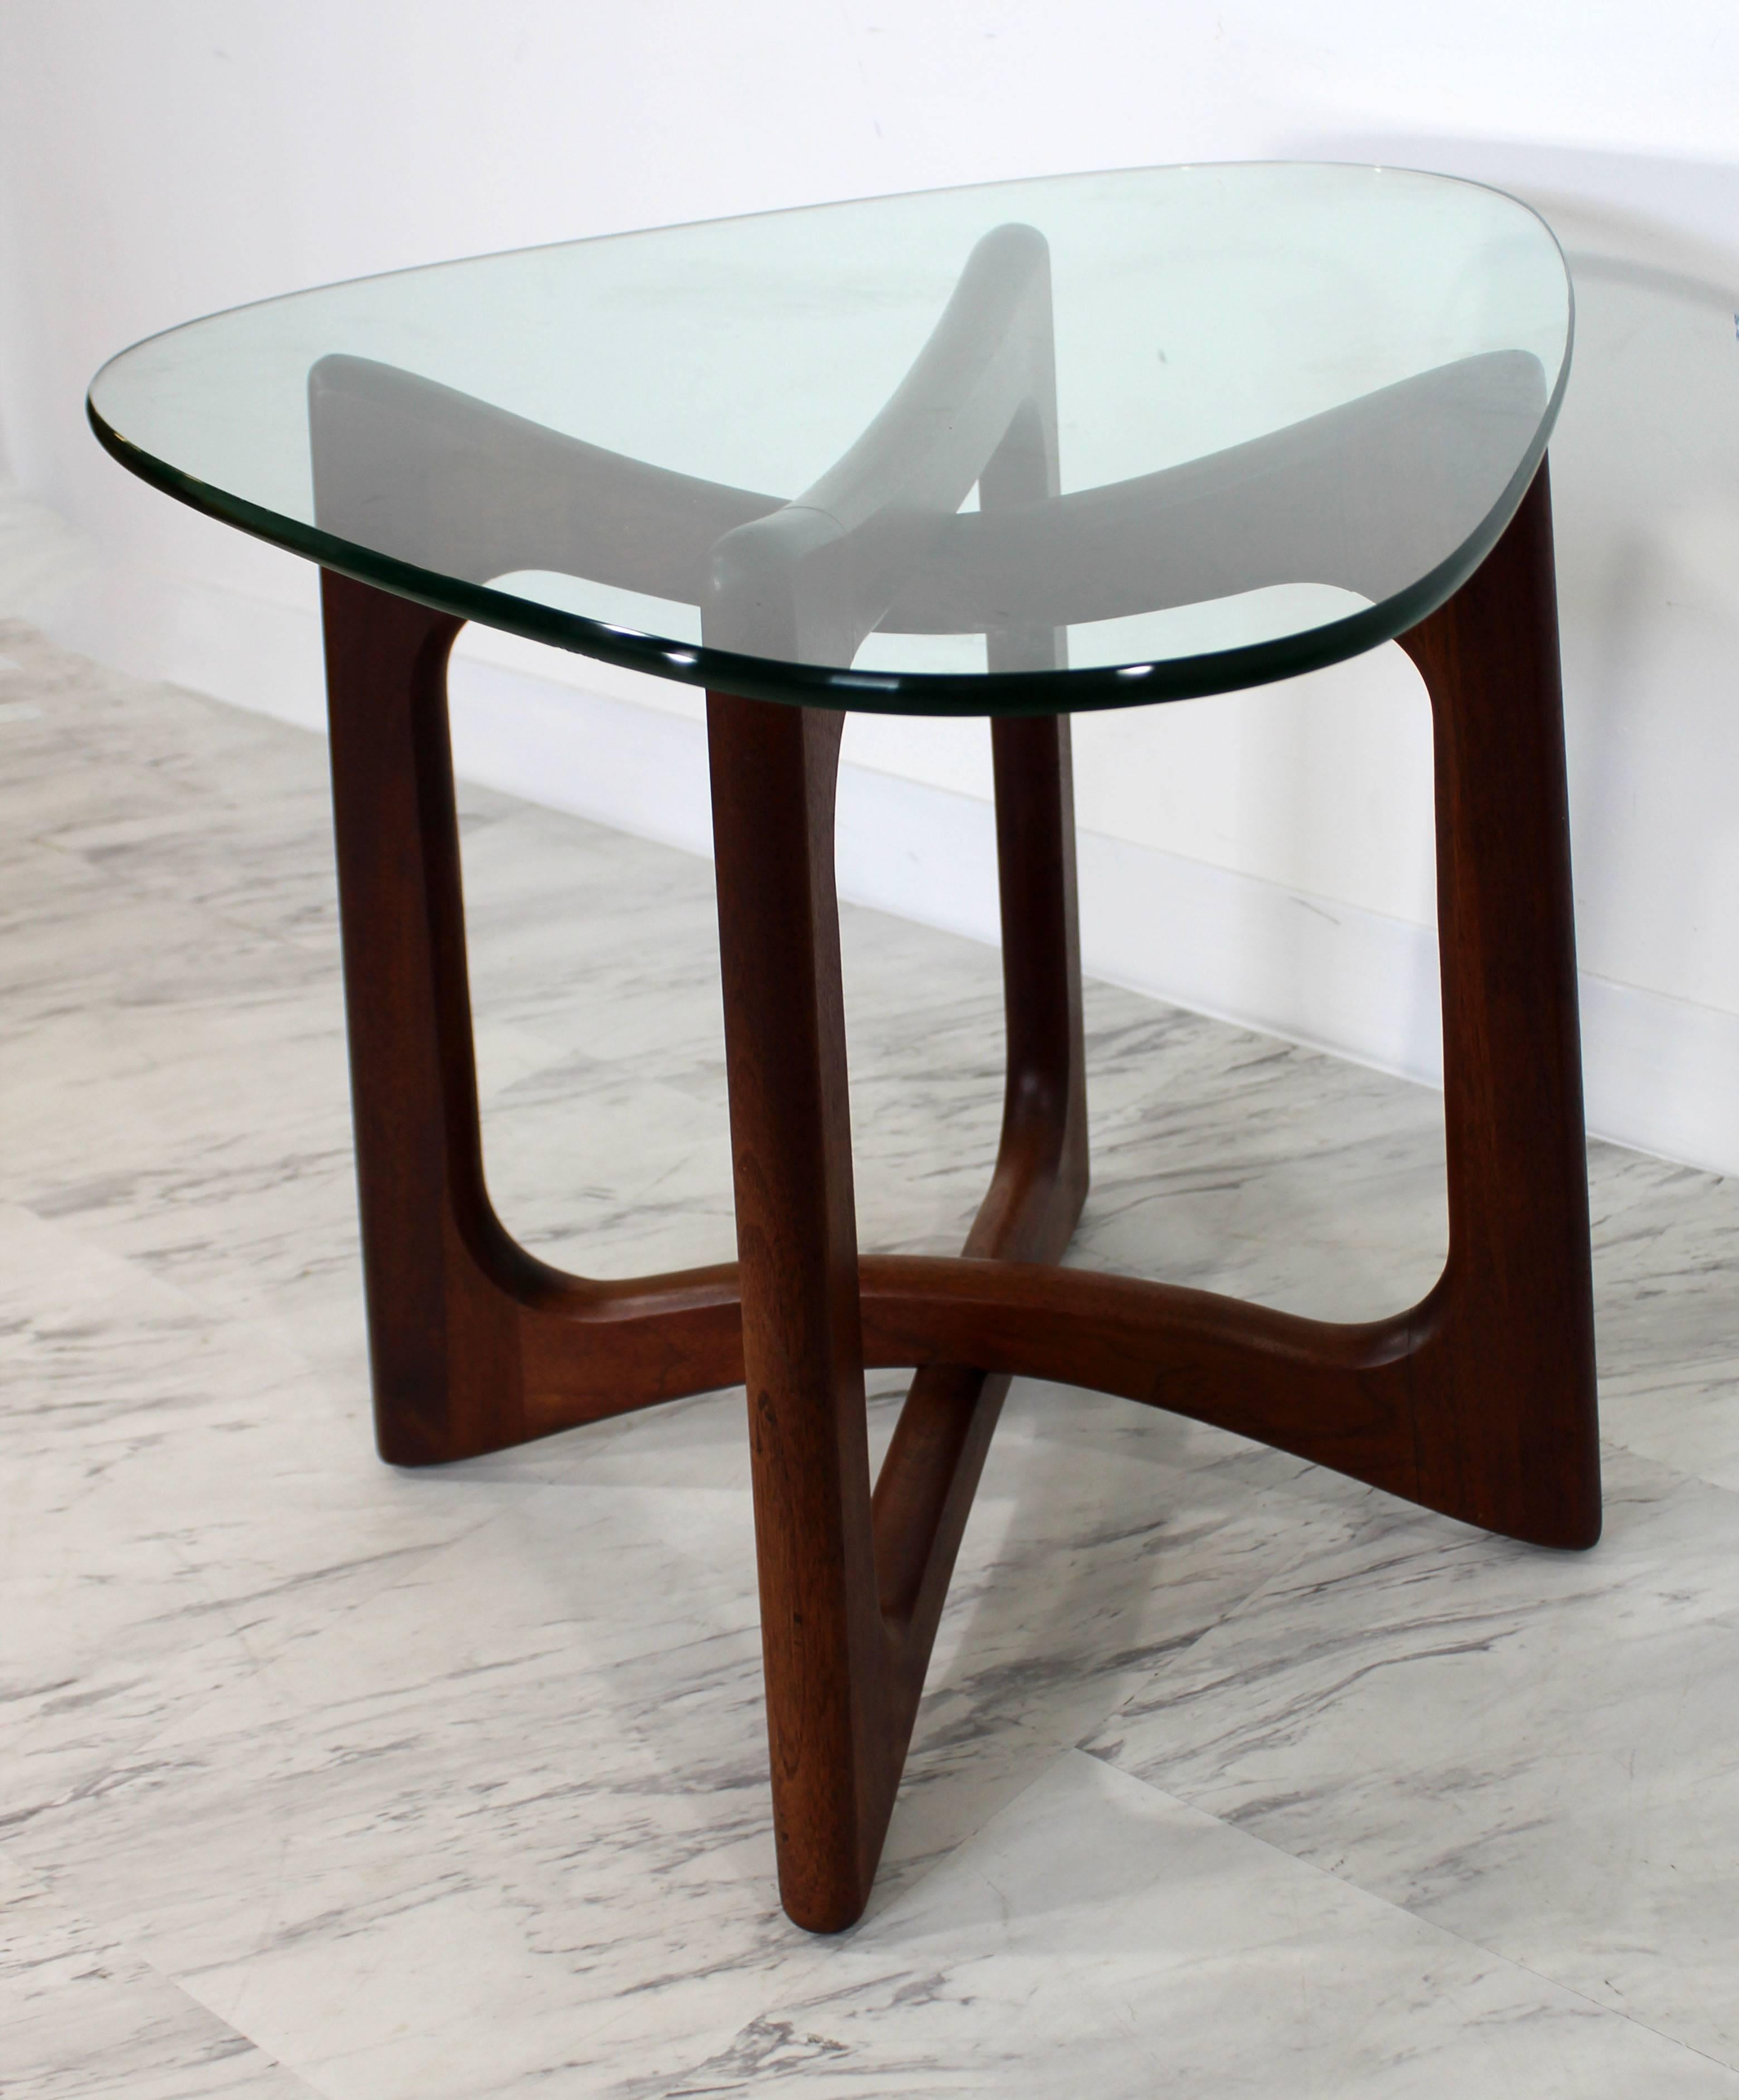 Mid-20th Century Mid-Century Modern Pair of Pearsall Walnut Boomerang Kidney Coffee and End Table